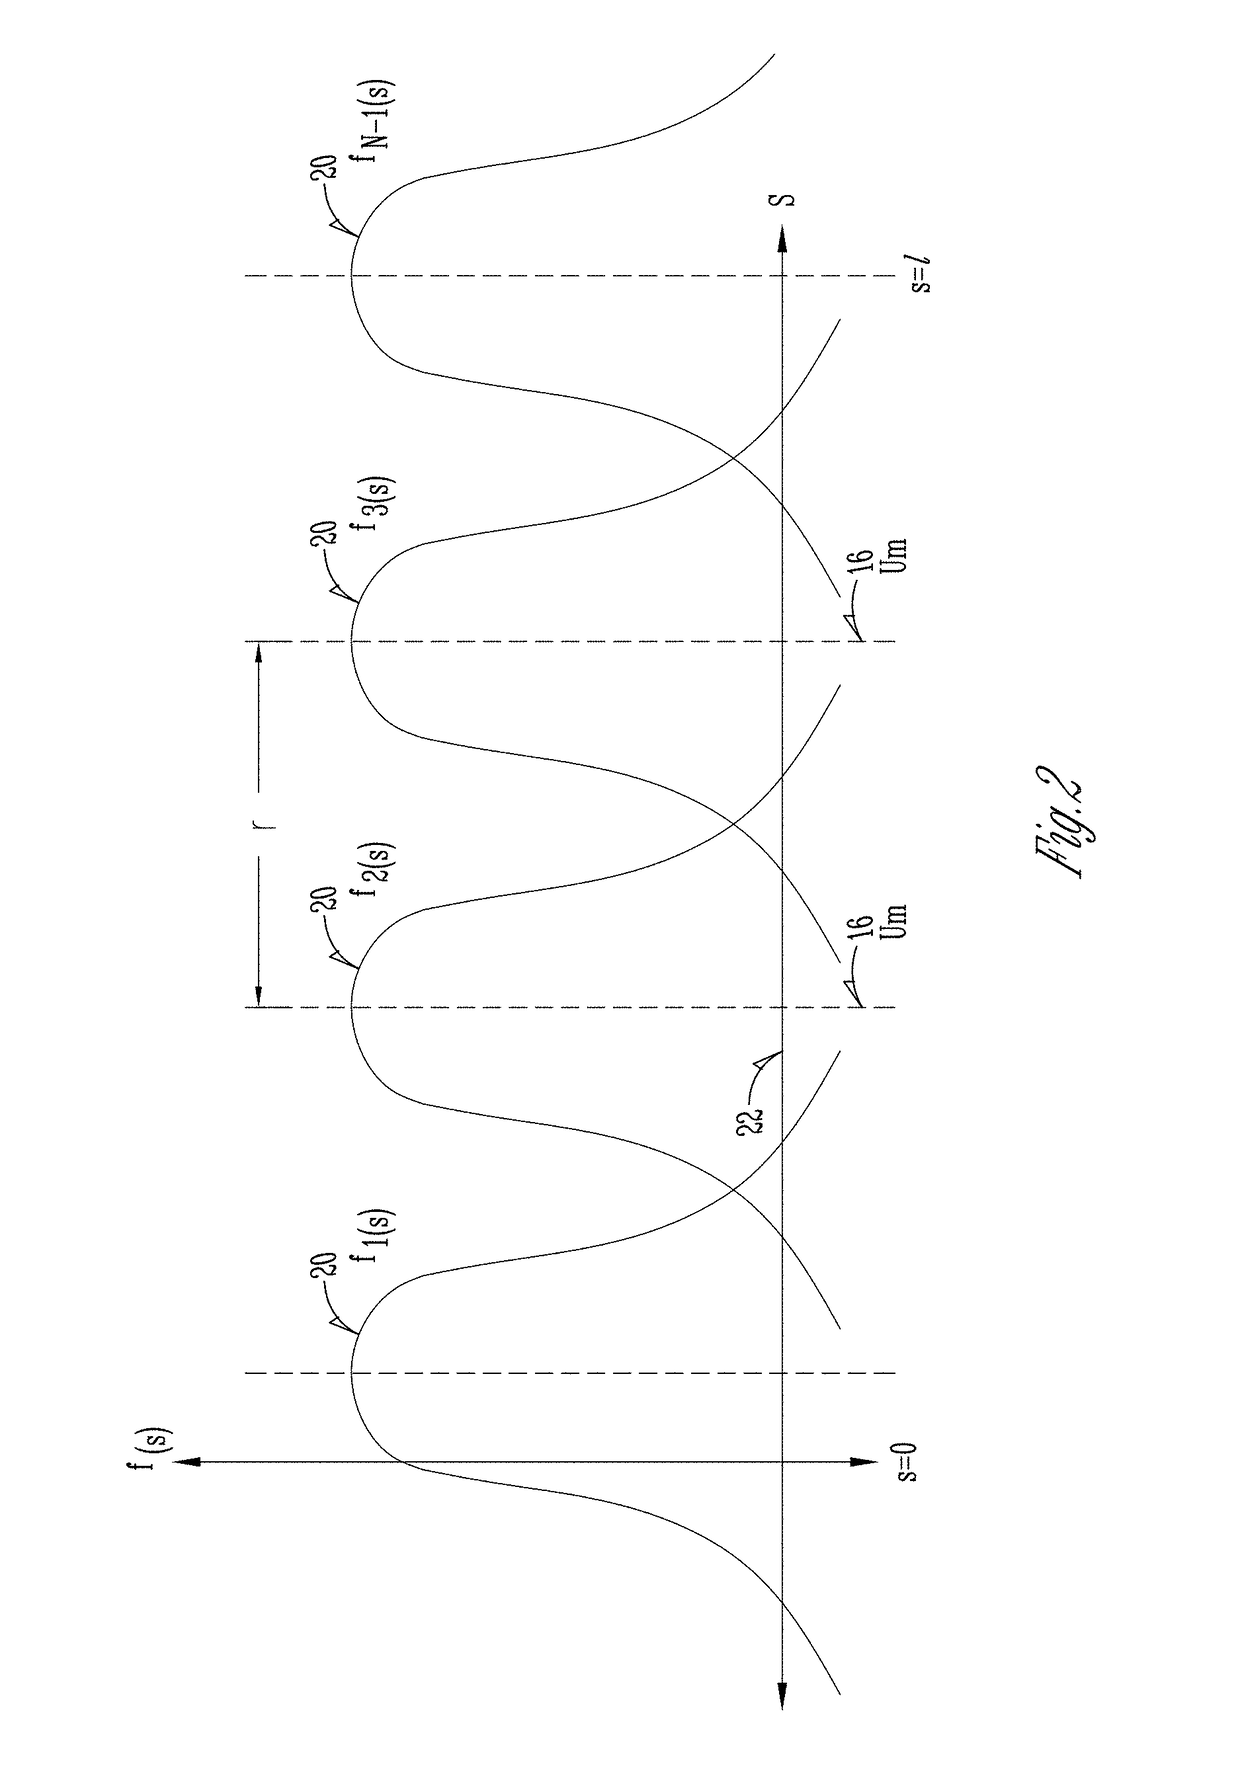 Curved path approximation in vehicle guidance systems and methods